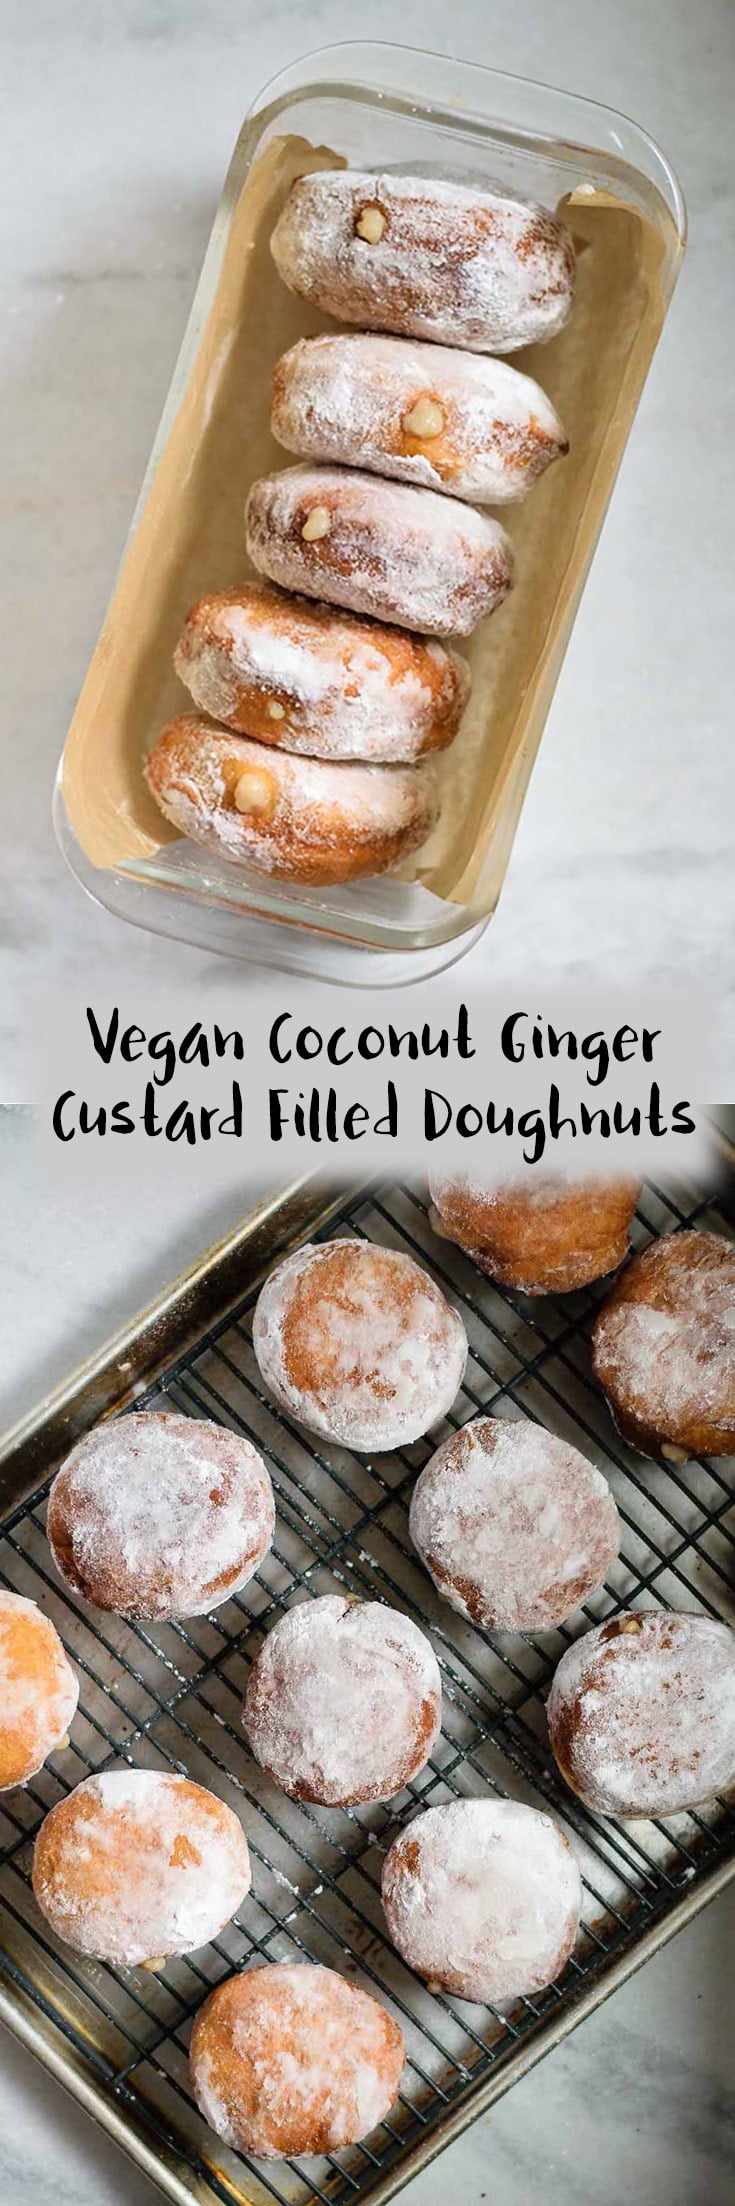 Vegan yeasted doughnuts stuffed with an easy to make and delicious coconut ginger custard. | thecuriouschickpea.com